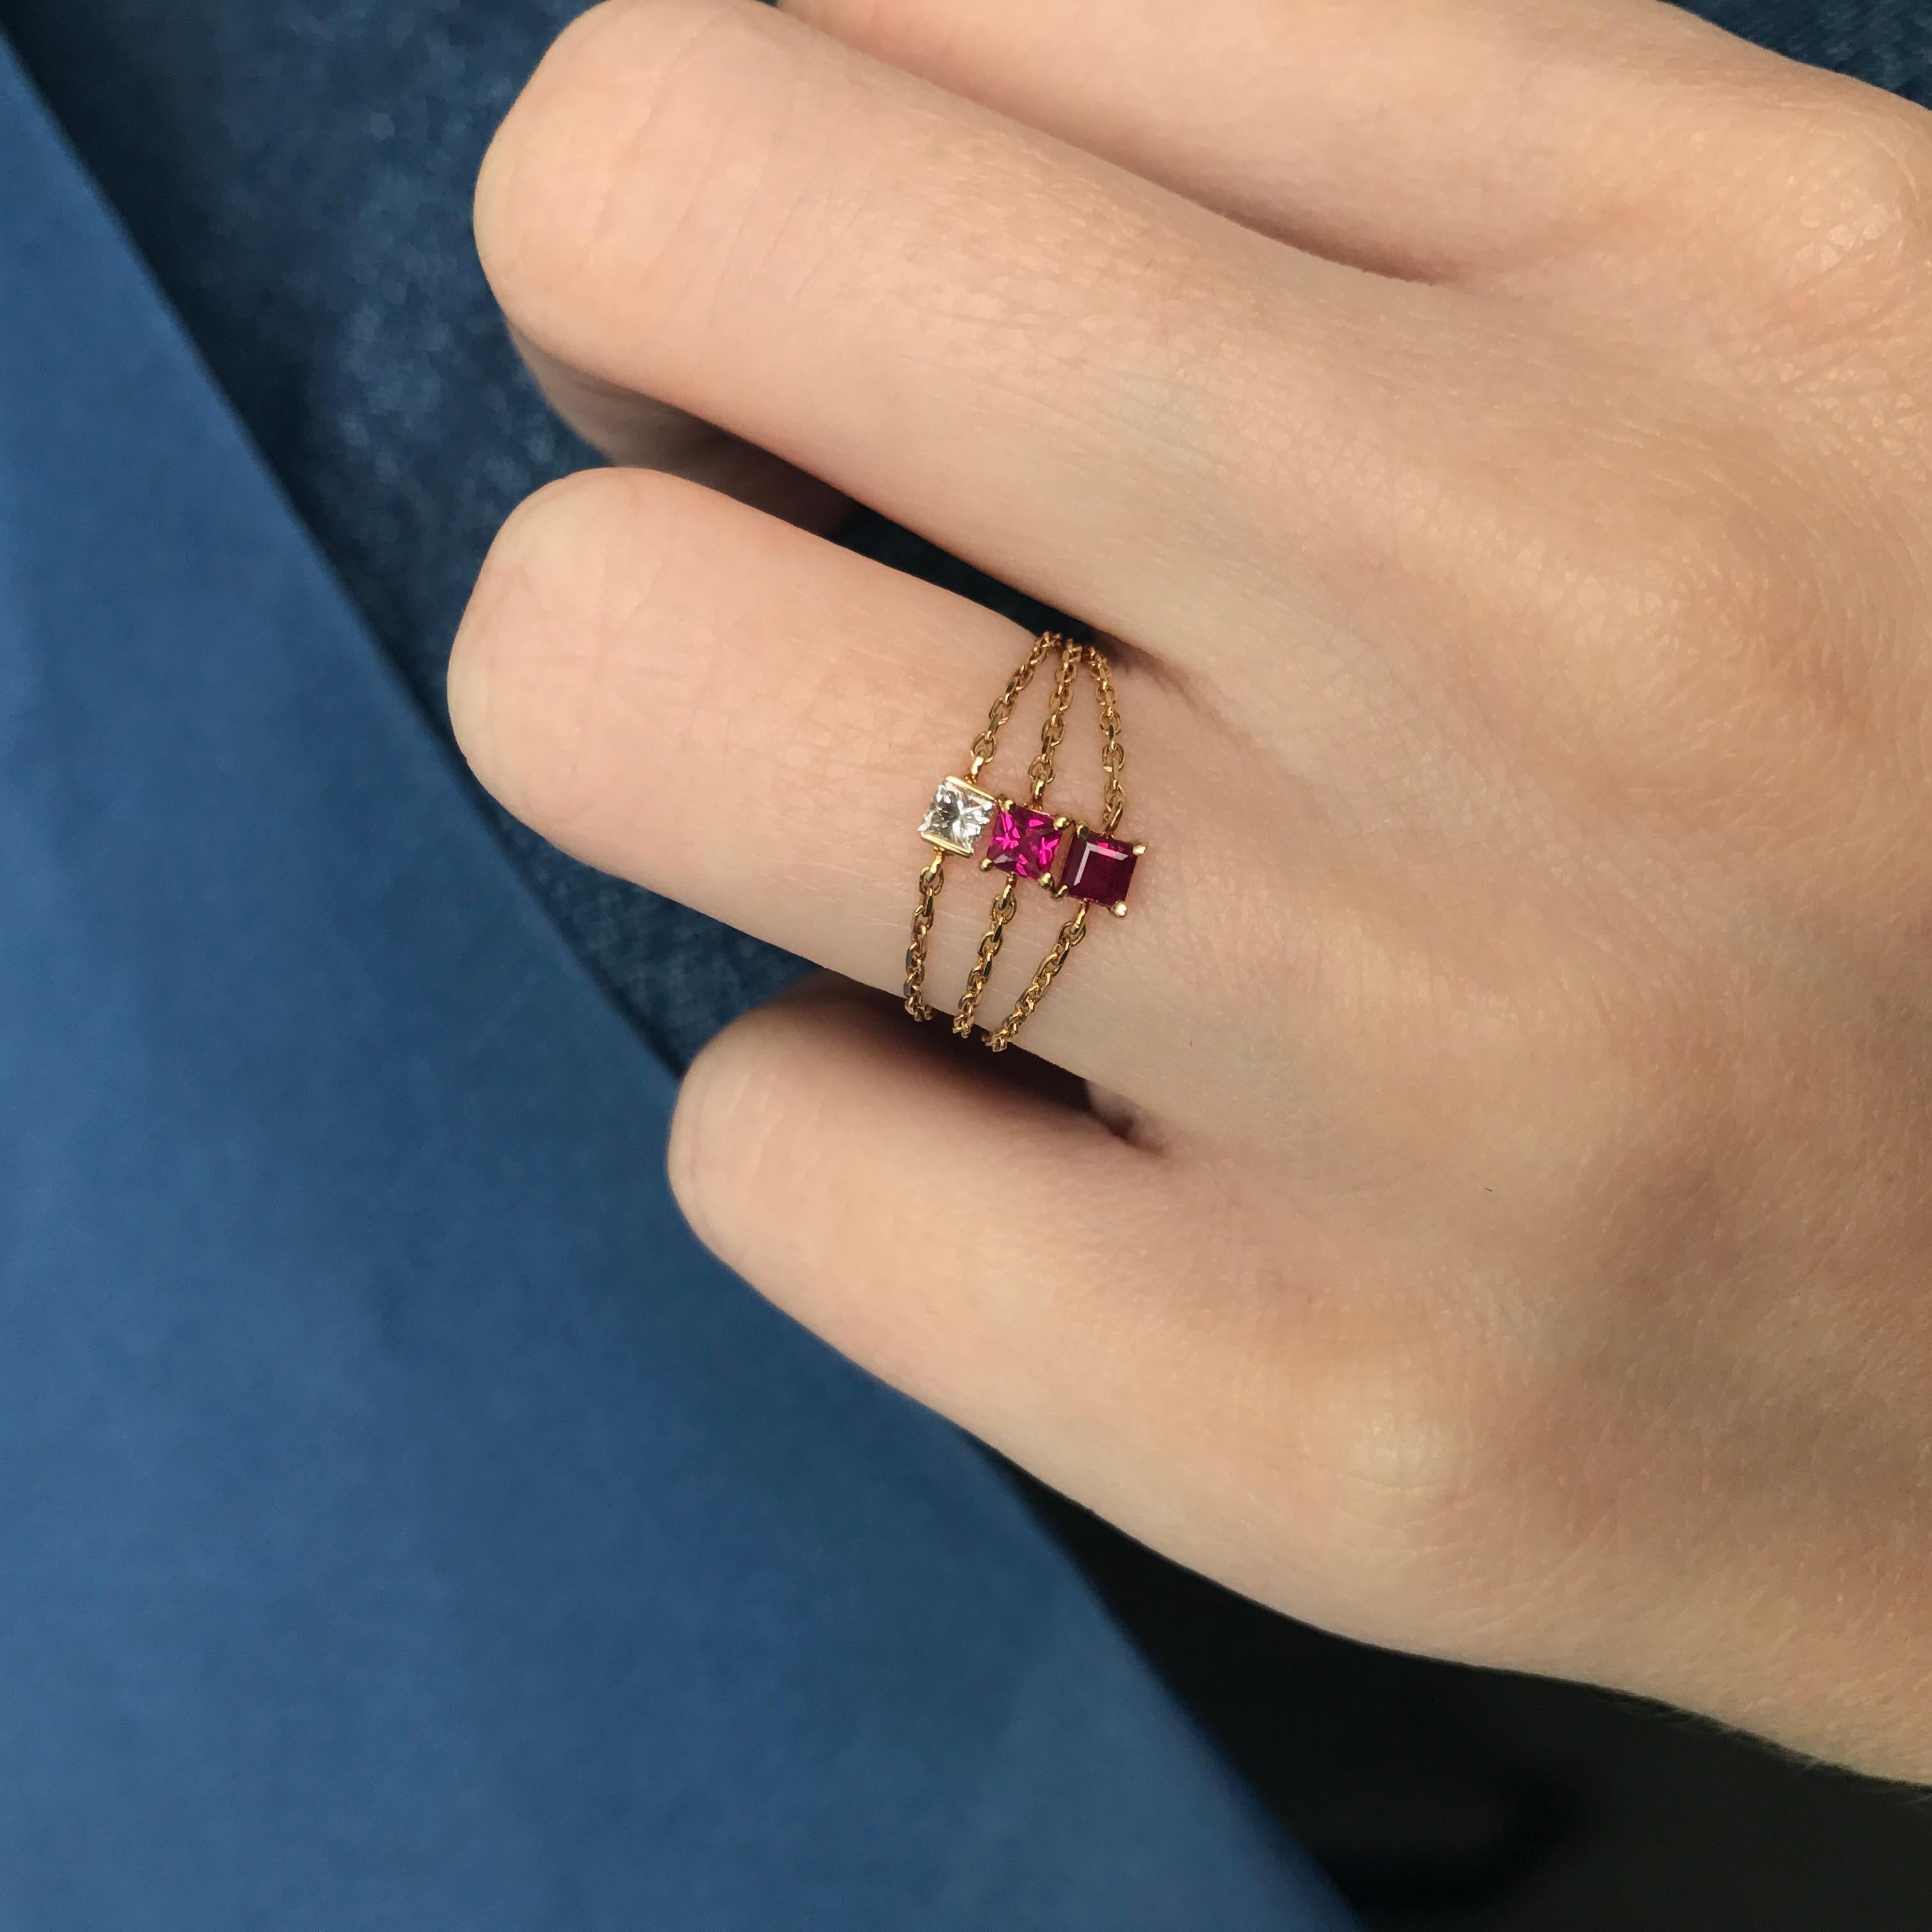 Our new Ruby chain ring in prong setting is our unbeatable best seller. It's comfortable to wear no matter what lifestyle you have. Beautiful, delicate and strong - we couldn't give a better description to this one.

Made in 14k yellow gold and